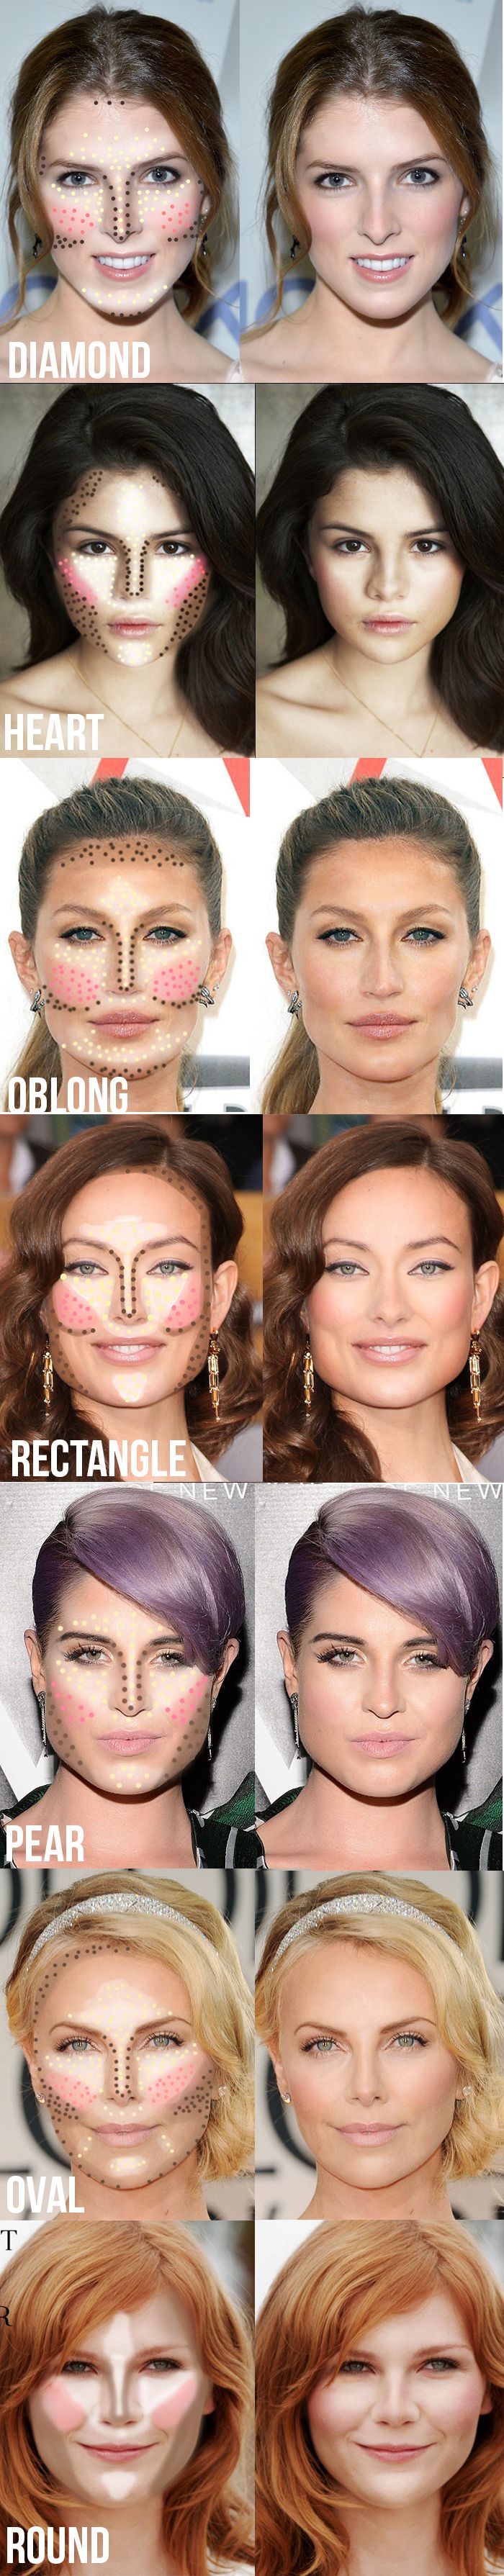 Highlight and Contour according to Face Shape